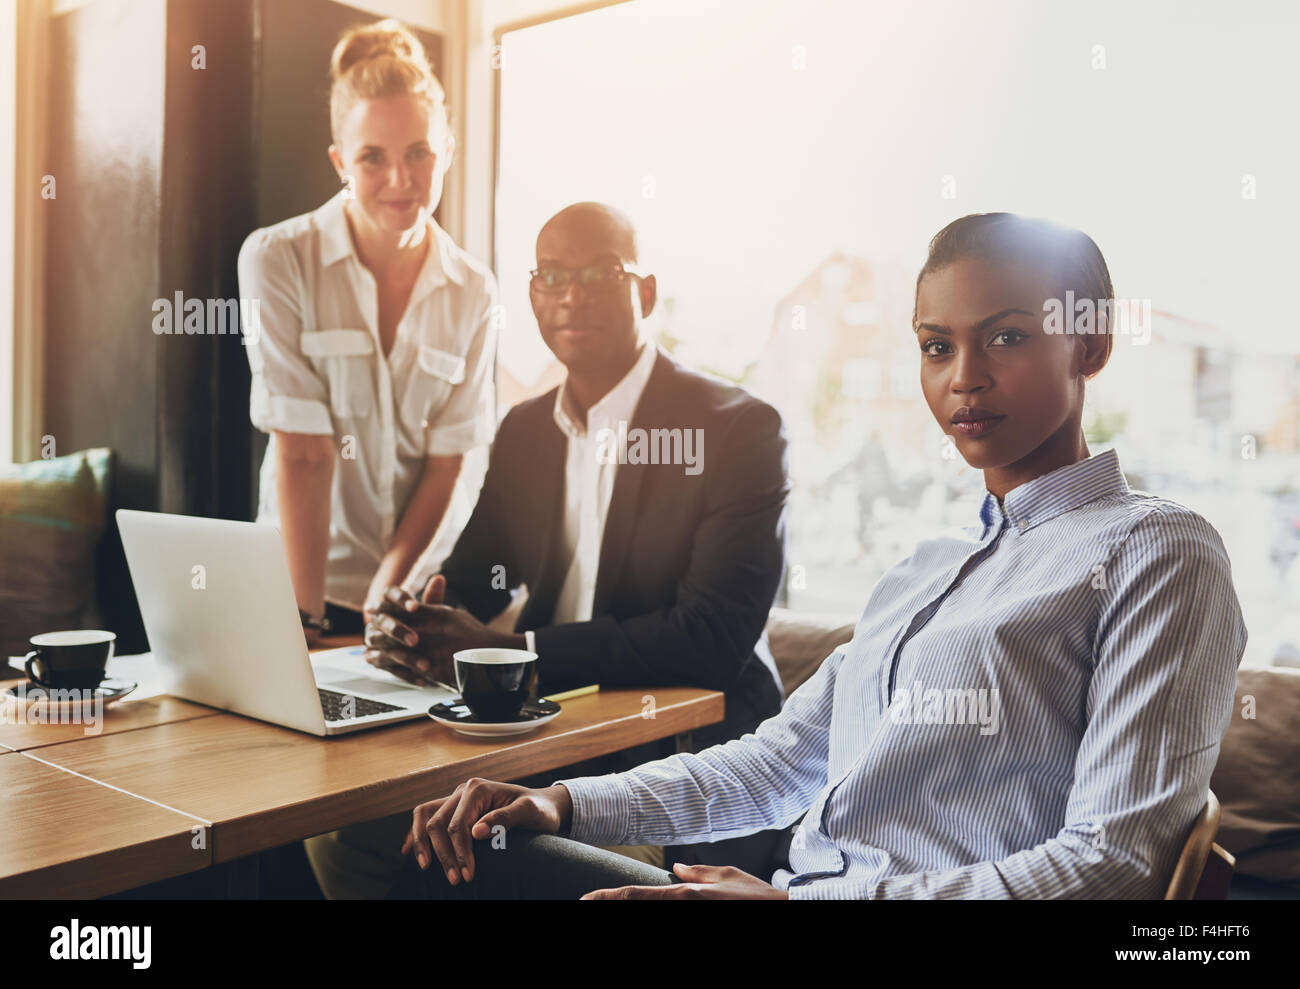 Portrait of serious business people, multi ethnic, sitting at a coffee shop working Stock Photo